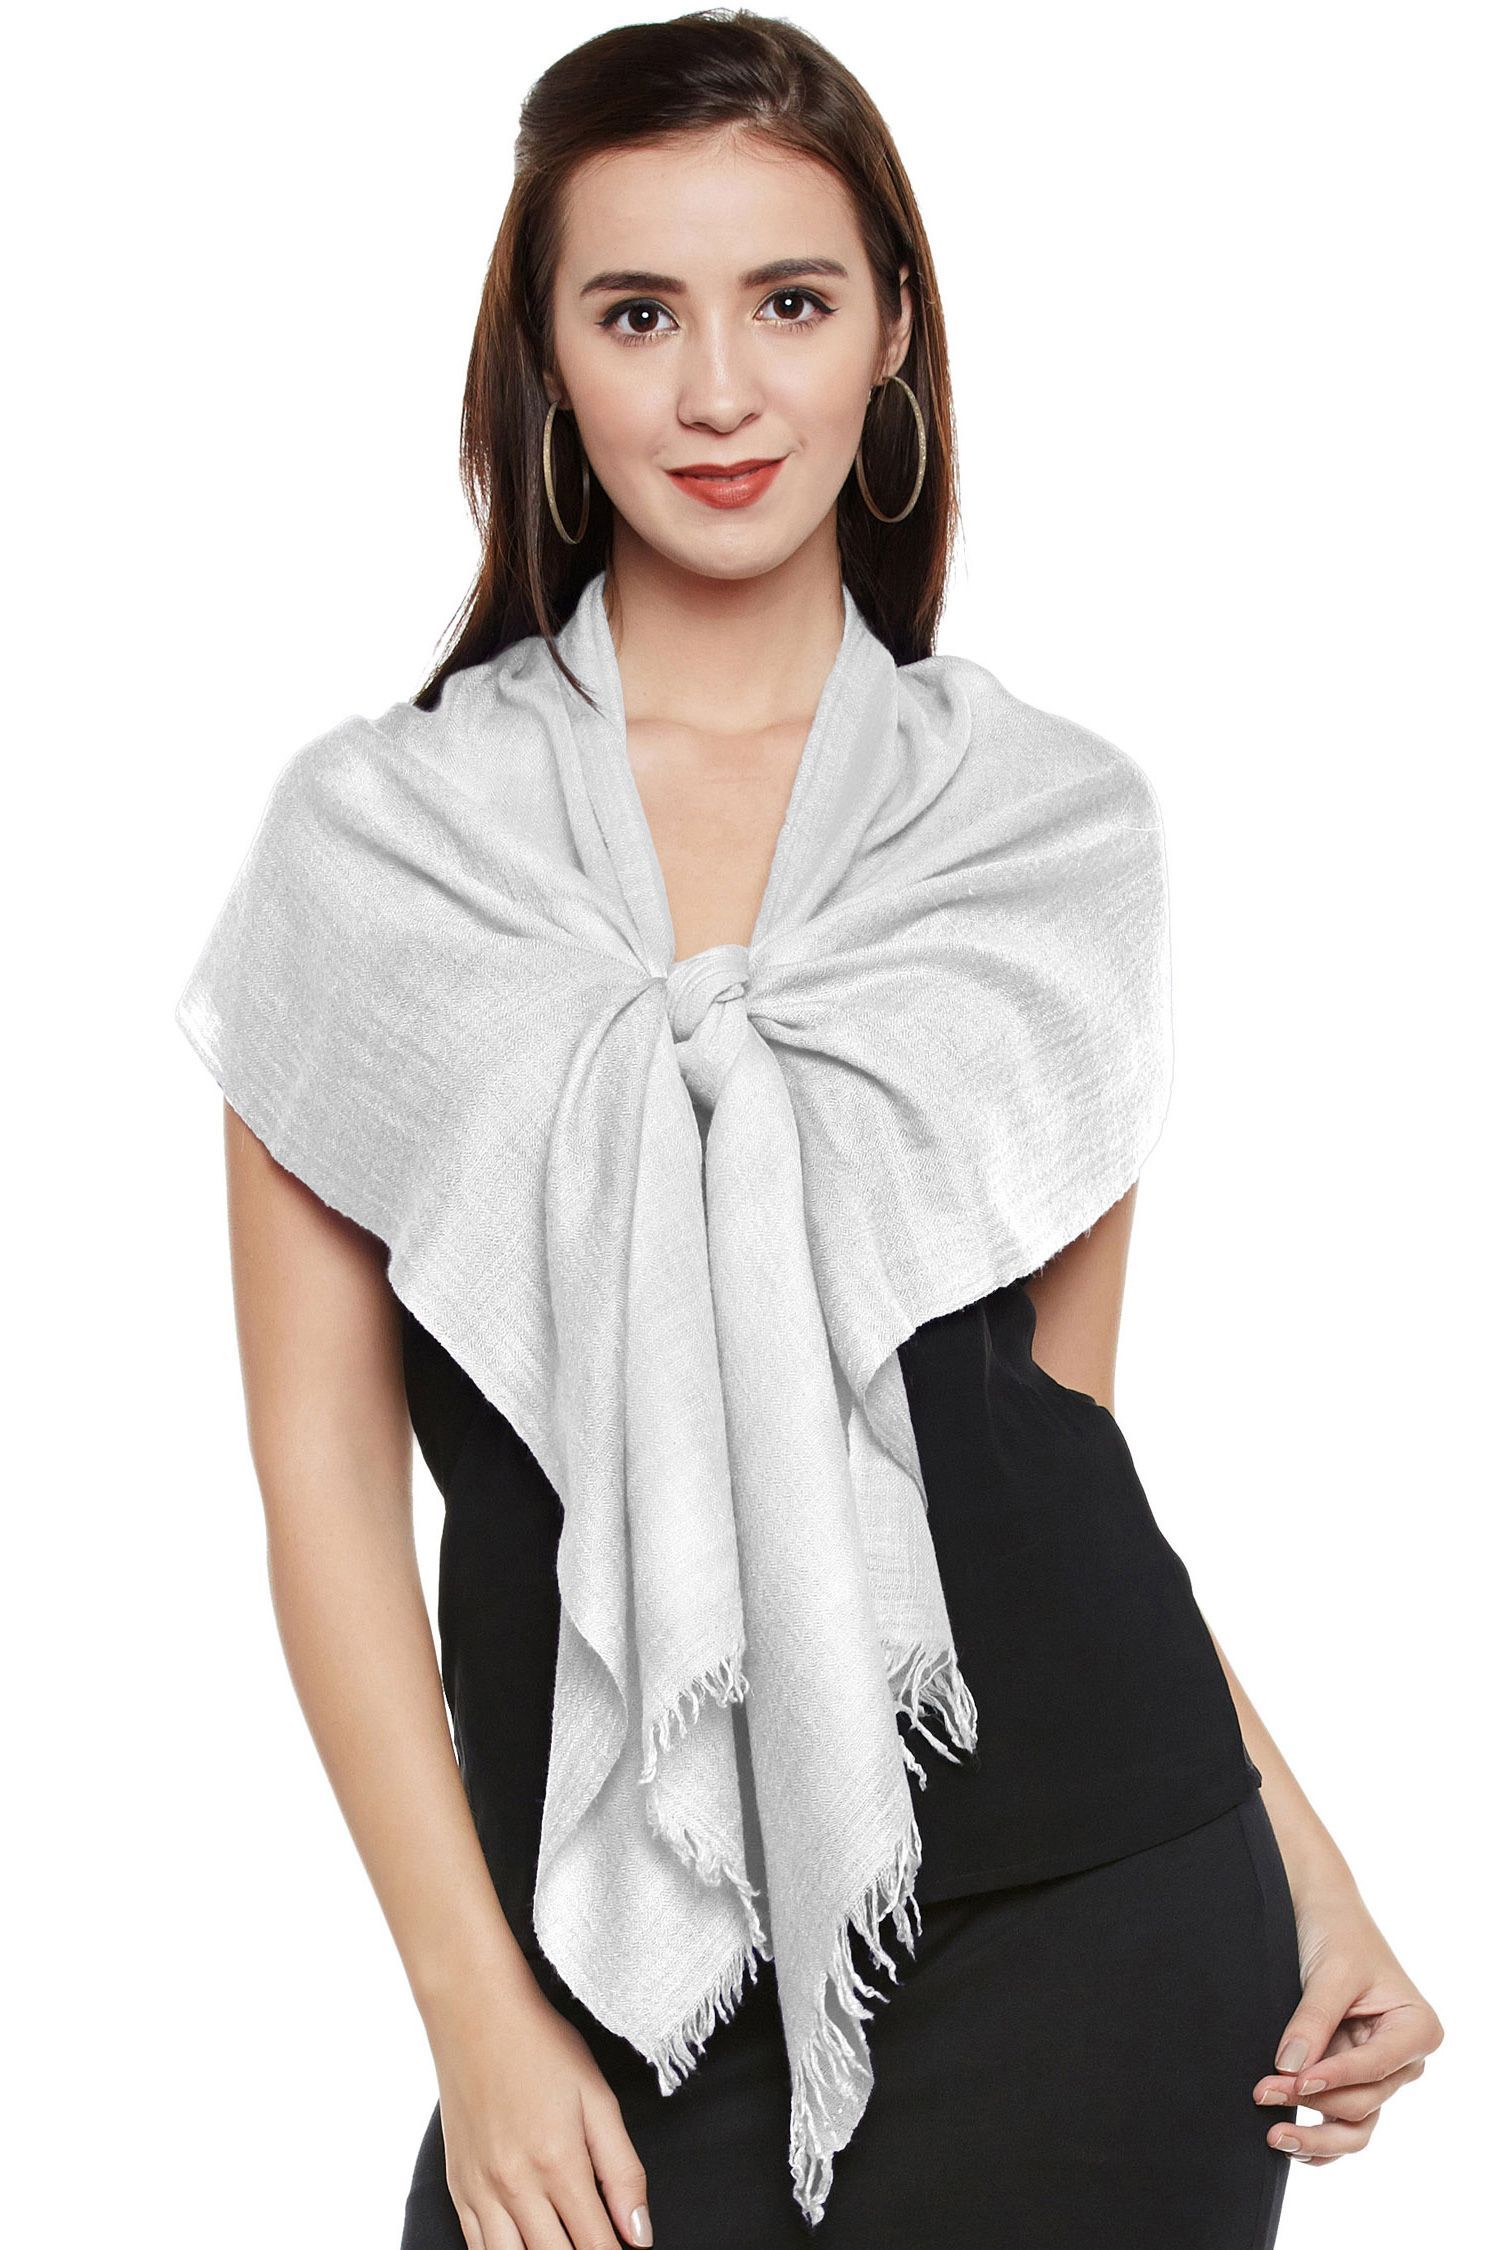 Luxurious and Soft Fair Trade Pashminas Make a Perfect Gift For a Special Person Cashmere and Modal Shawls and Pashmina Scarves for Women